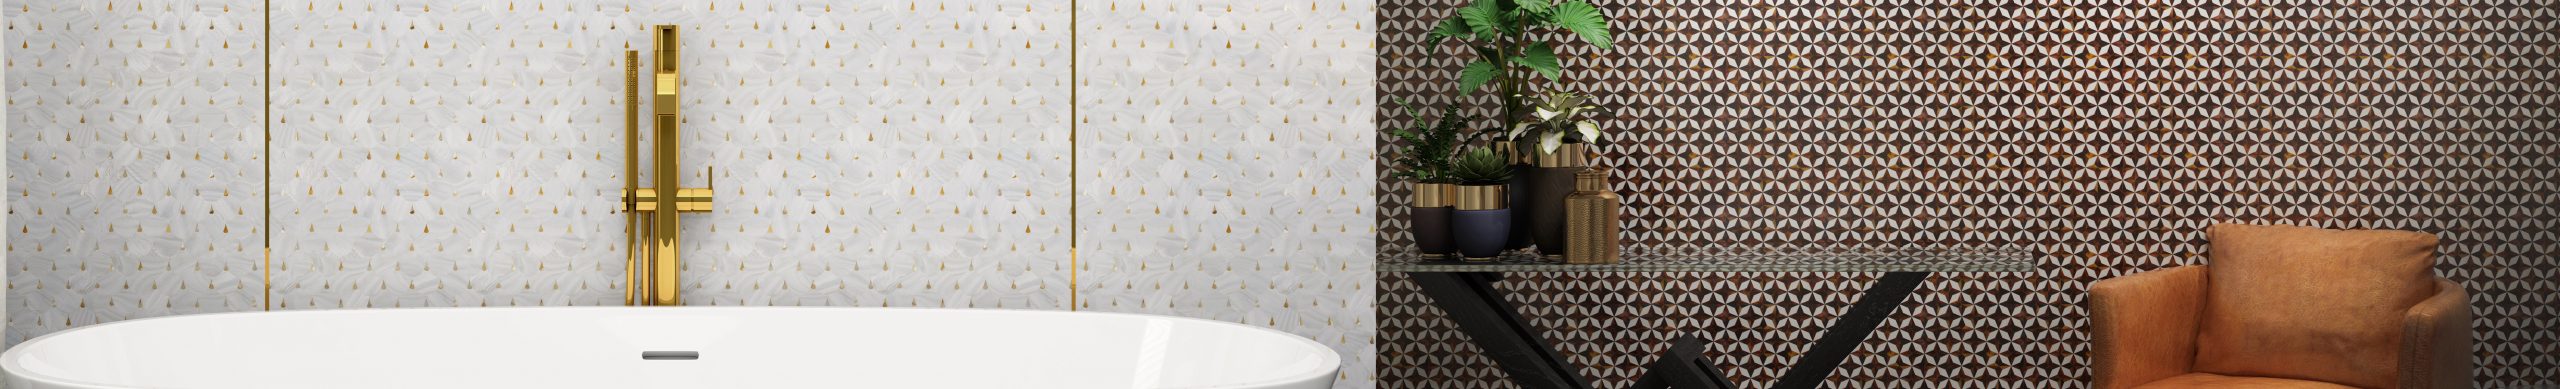 Siminetti luxury mother-of-pearl tiles